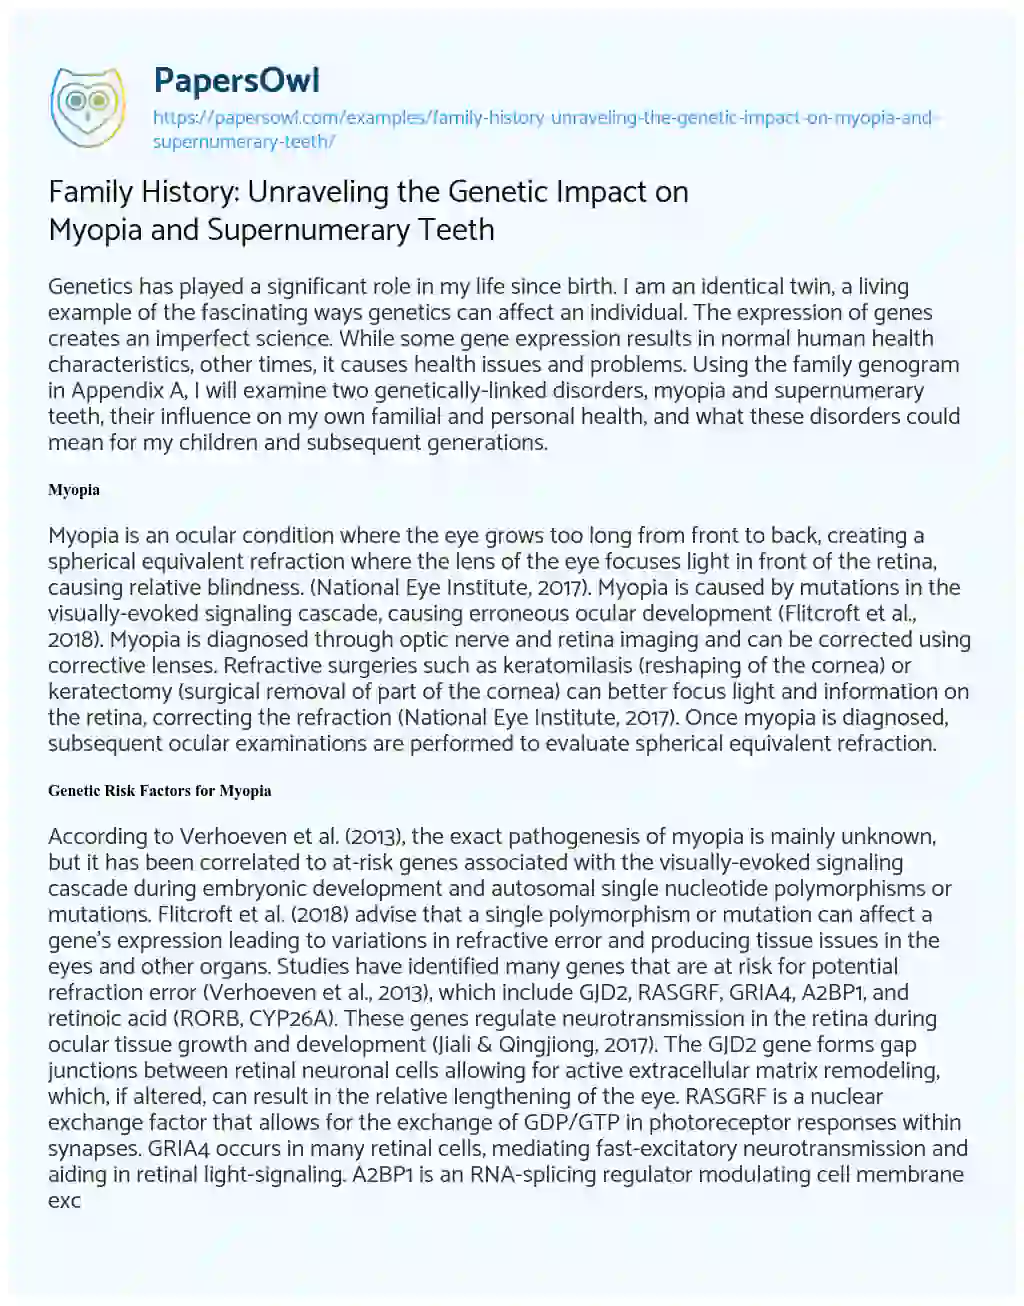 Essay on Family History: Unraveling the Genetic Impact on Myopia and Supernumerary Teeth